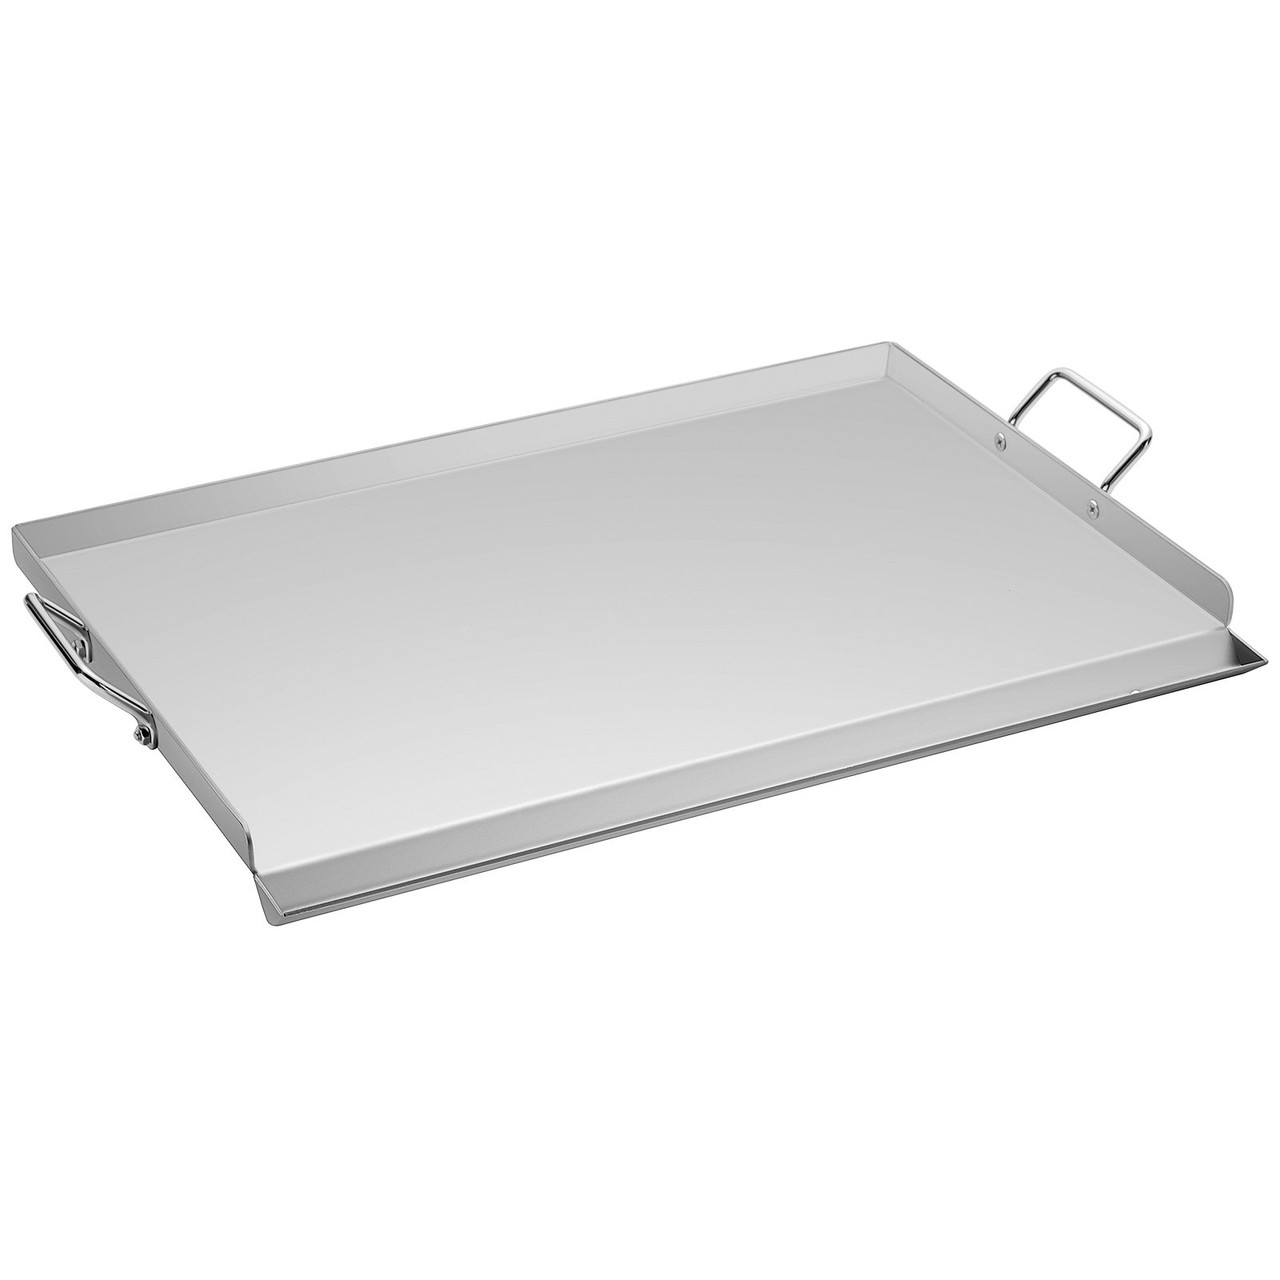 Stainless Steel Griddle, 14" x 32.3" Griddle Flat Top Plate, Griddle for BBQ Charcoal/Gas Gril with 2 Handles, Rectangular Flat Top Grill with Extra